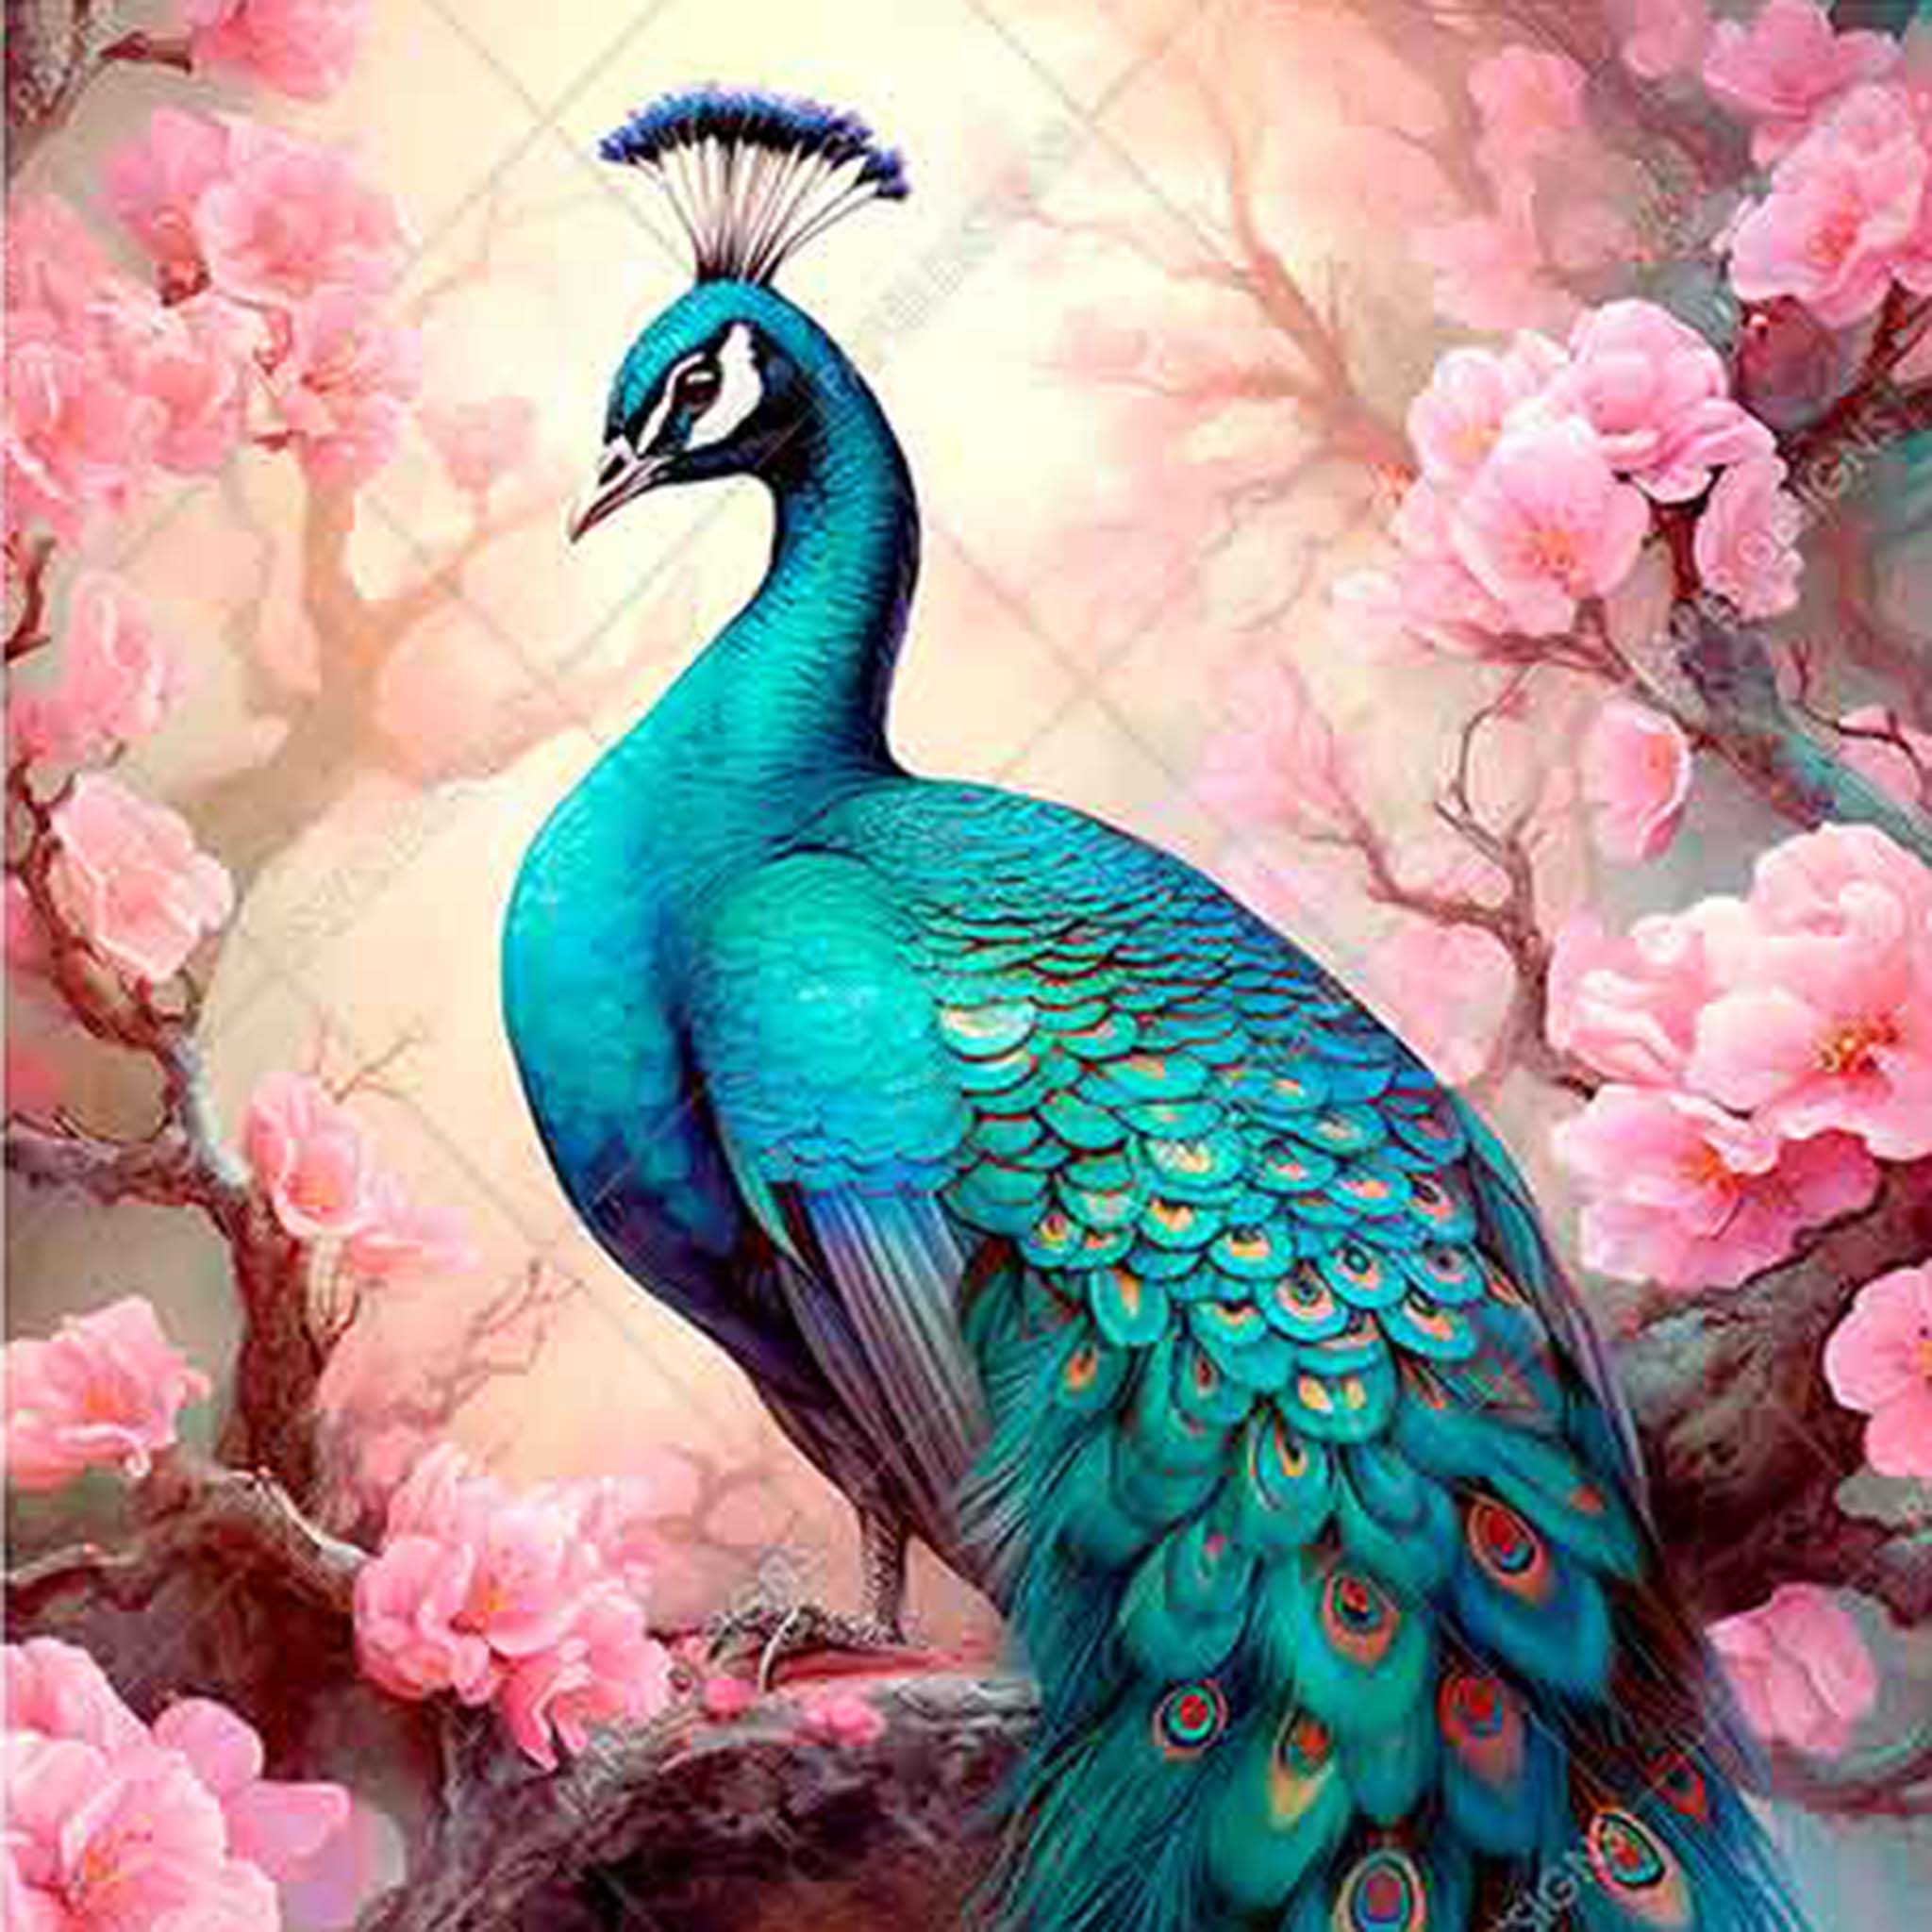 Close-up of an A3 rice paper design that features a jewel toned peacock perched among pink flowering branches.